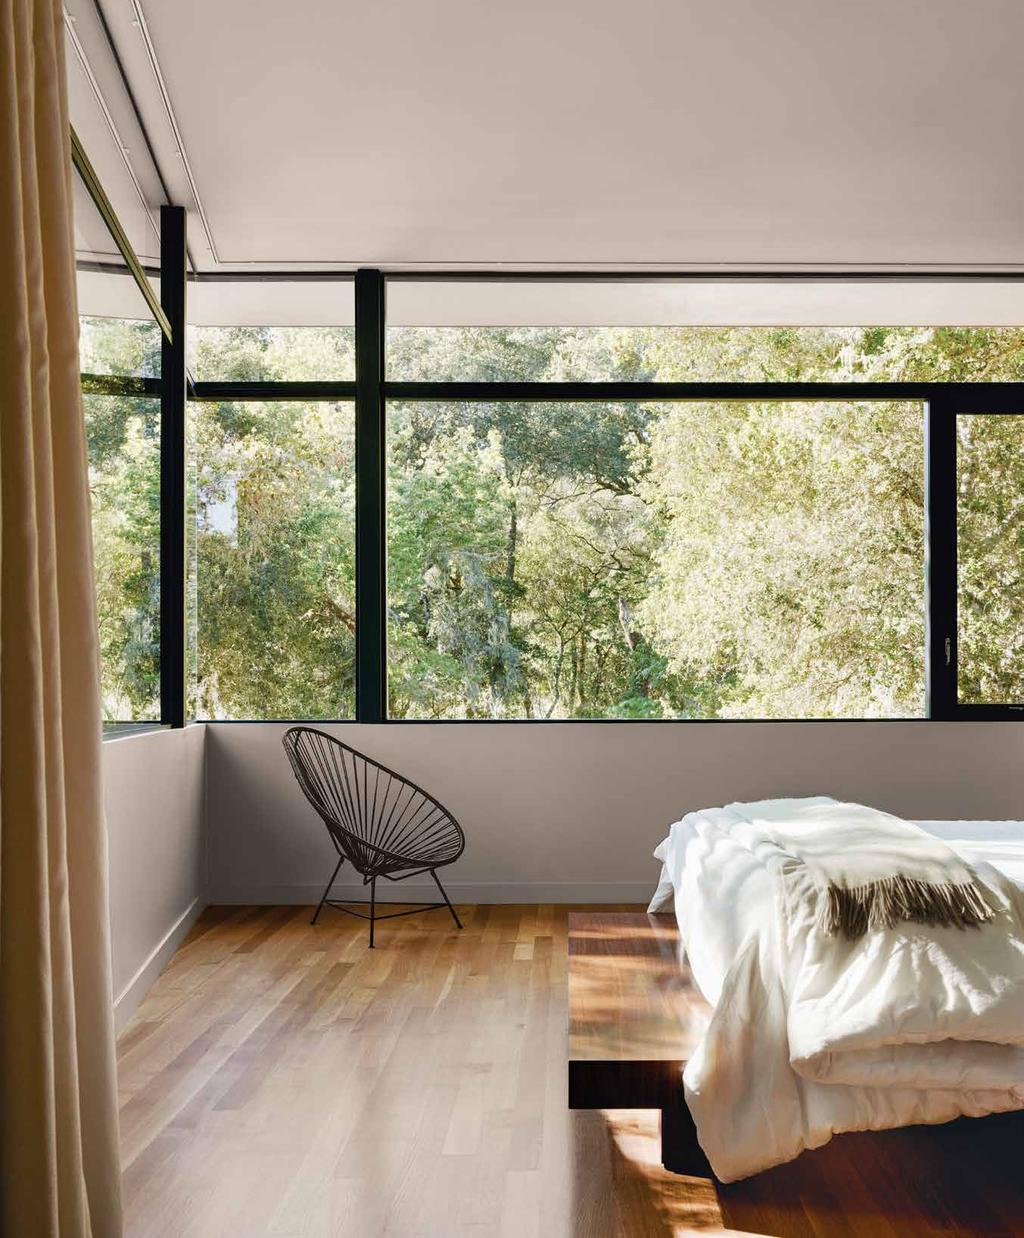 Left: A floor-to-ceiling window allows natural daylight into the guest-wing bathroom.